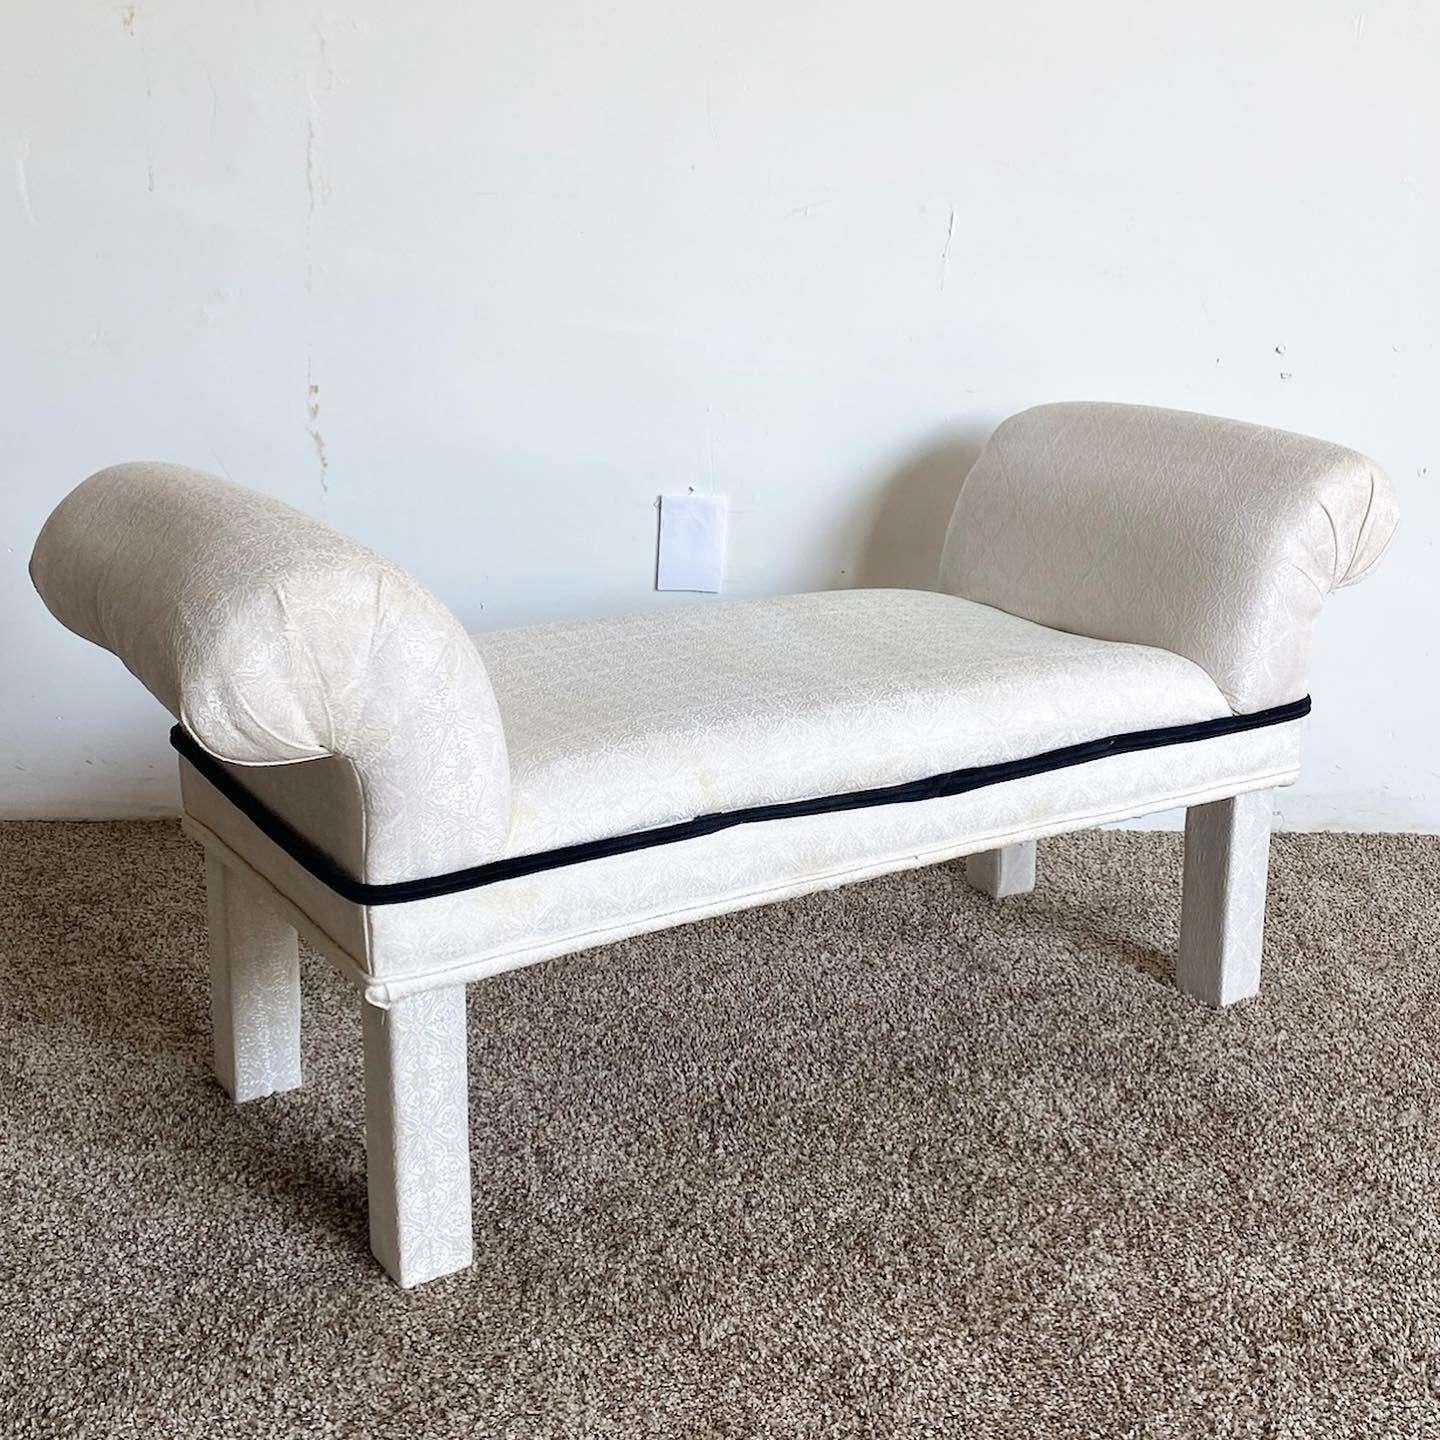 Exceptional vintage postmodern flair branch. Feature an off white floral upholstery with black trim.

